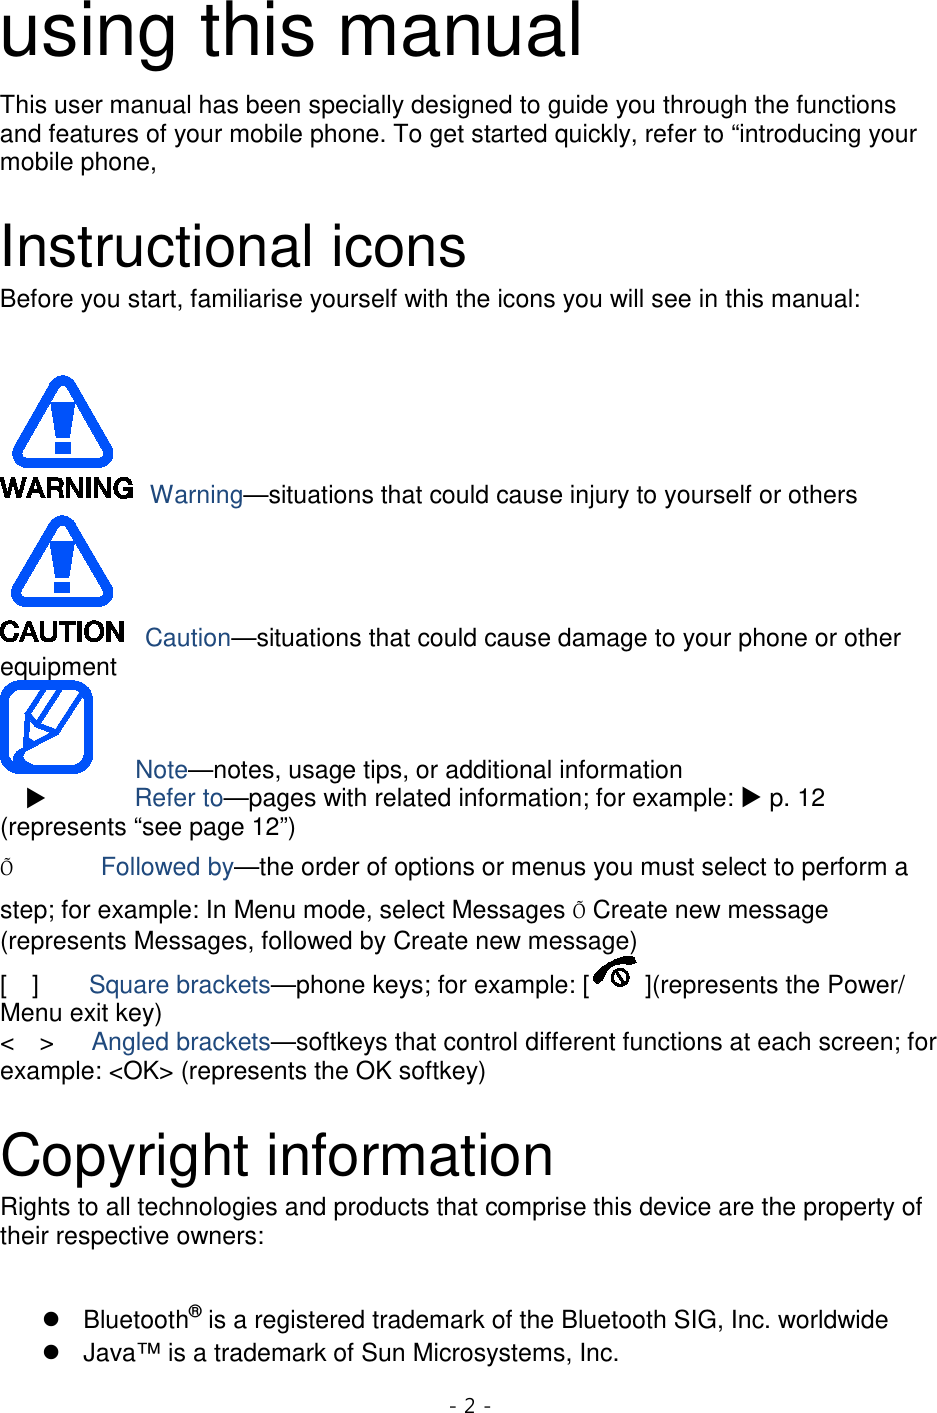 - 2 -  using this manual This user manual has been specially designed to guide you through the functions and features of your mobile phone. To get started quickly, refer to “introducing your mobile phone,  Instructional icons Before you start, familiarise yourself with the icons you will see in this manual:     Warning—situations that could cause injury to yourself or others  Caution—situations that could cause damage to your phone or other equipment    Note—notes, usage tips, or additional information          Refer to—pages with related information; for example:  p. 12 (represents “see page 12”) Õ       Followed by—the order of options or menus you must select to perform a step; for example: In Menu mode, select Messages Õ Create new message (represents Messages, followed by Create new message) [  ]    Square brackets—phone keys; for example: [ ](represents the Power/ Menu exit key) &lt;  &gt;   Angled brackets—softkeys that control different functions at each screen; for example: &lt;OK&gt; (represents the OK softkey)  Copyright information Rights to all technologies and products that comprise this device are the property of their respective owners:   Bluetooth® Java™ is a trademark of Sun Microsystems, Inc.  is a registered trademark of the Bluetooth SIG, Inc. worldwide 